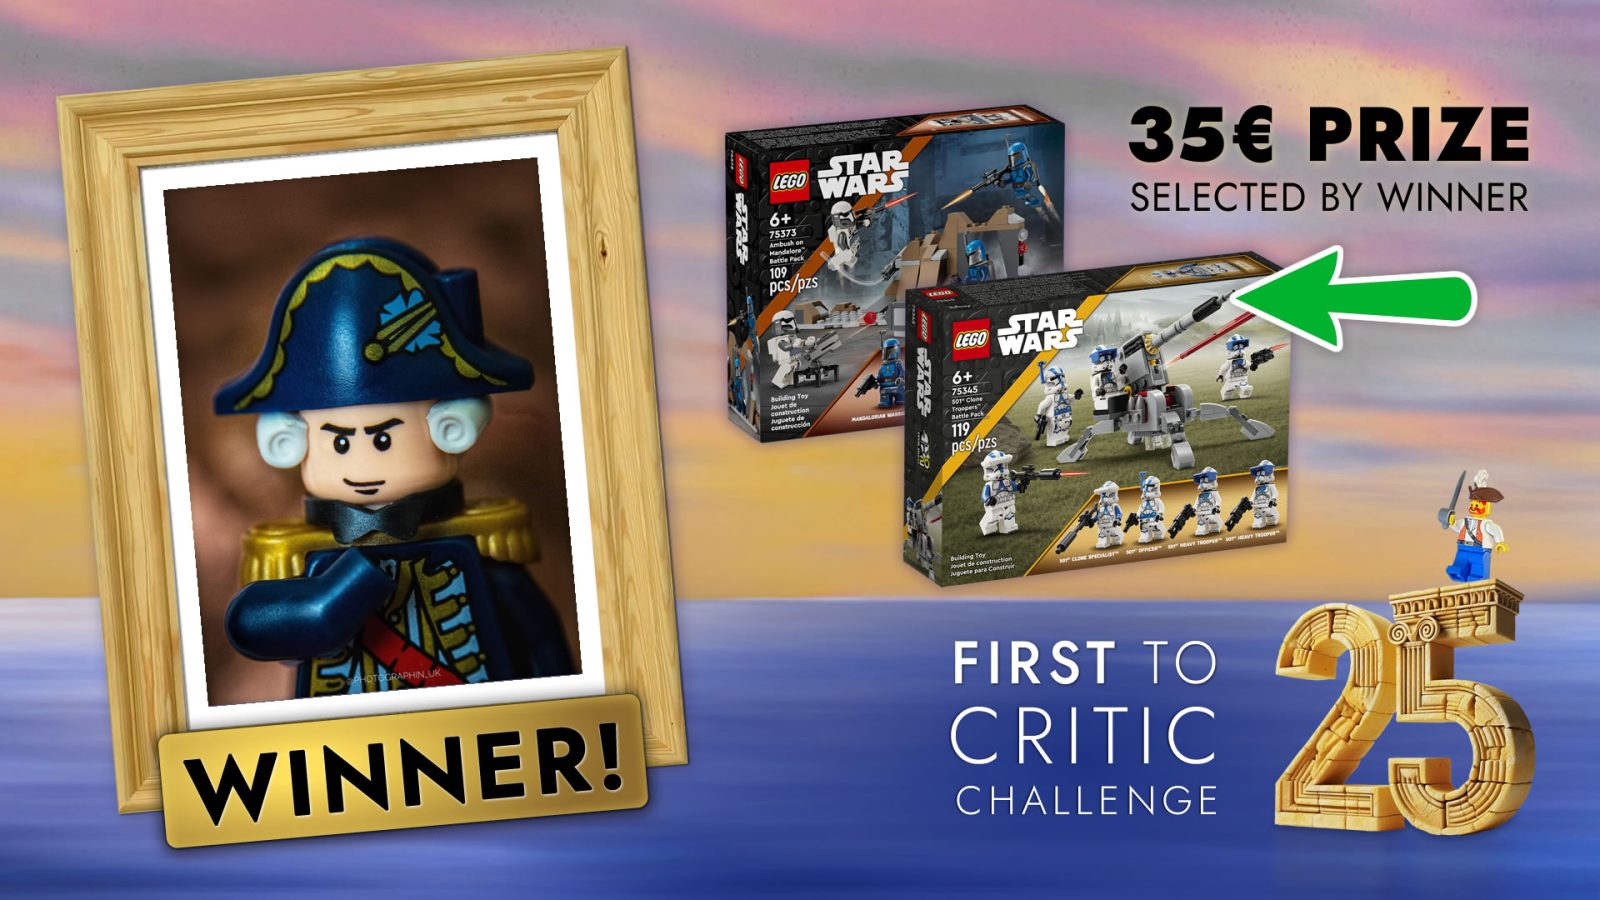 First to 25 Critic Challenge Winner